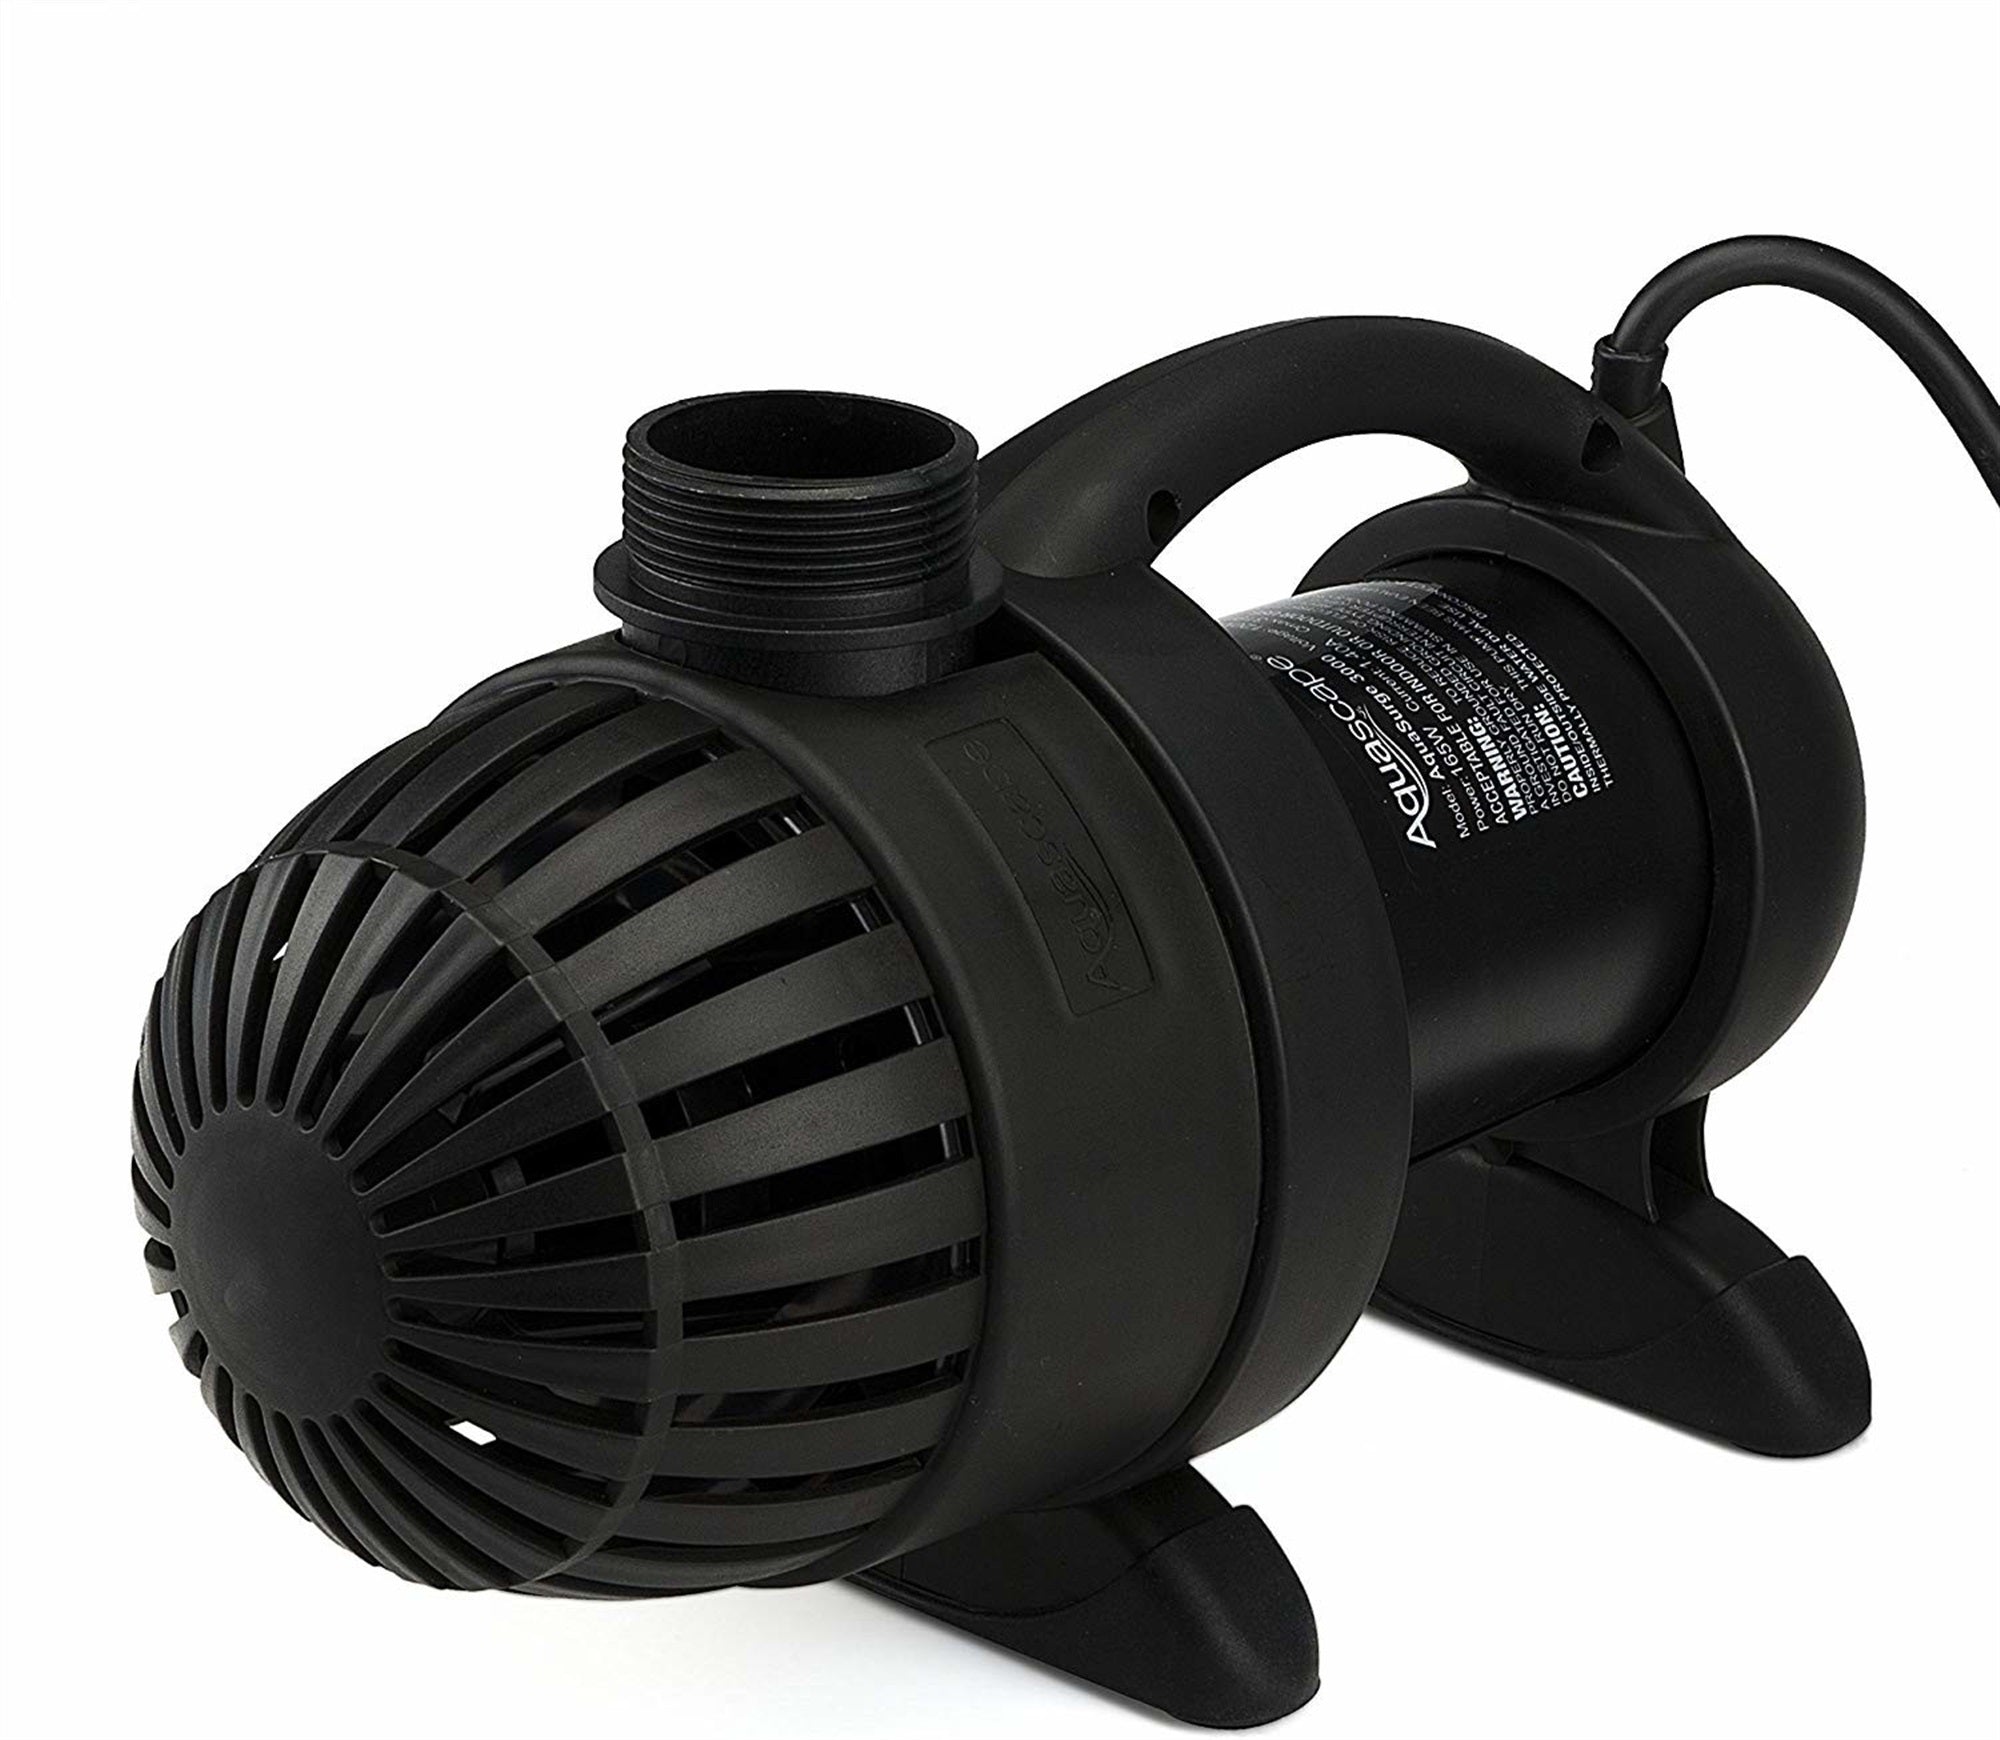 Aquascape AquaSurge Asynchronous Pump for Ponds, Pondless Waterfalls, and Skimmer Filters